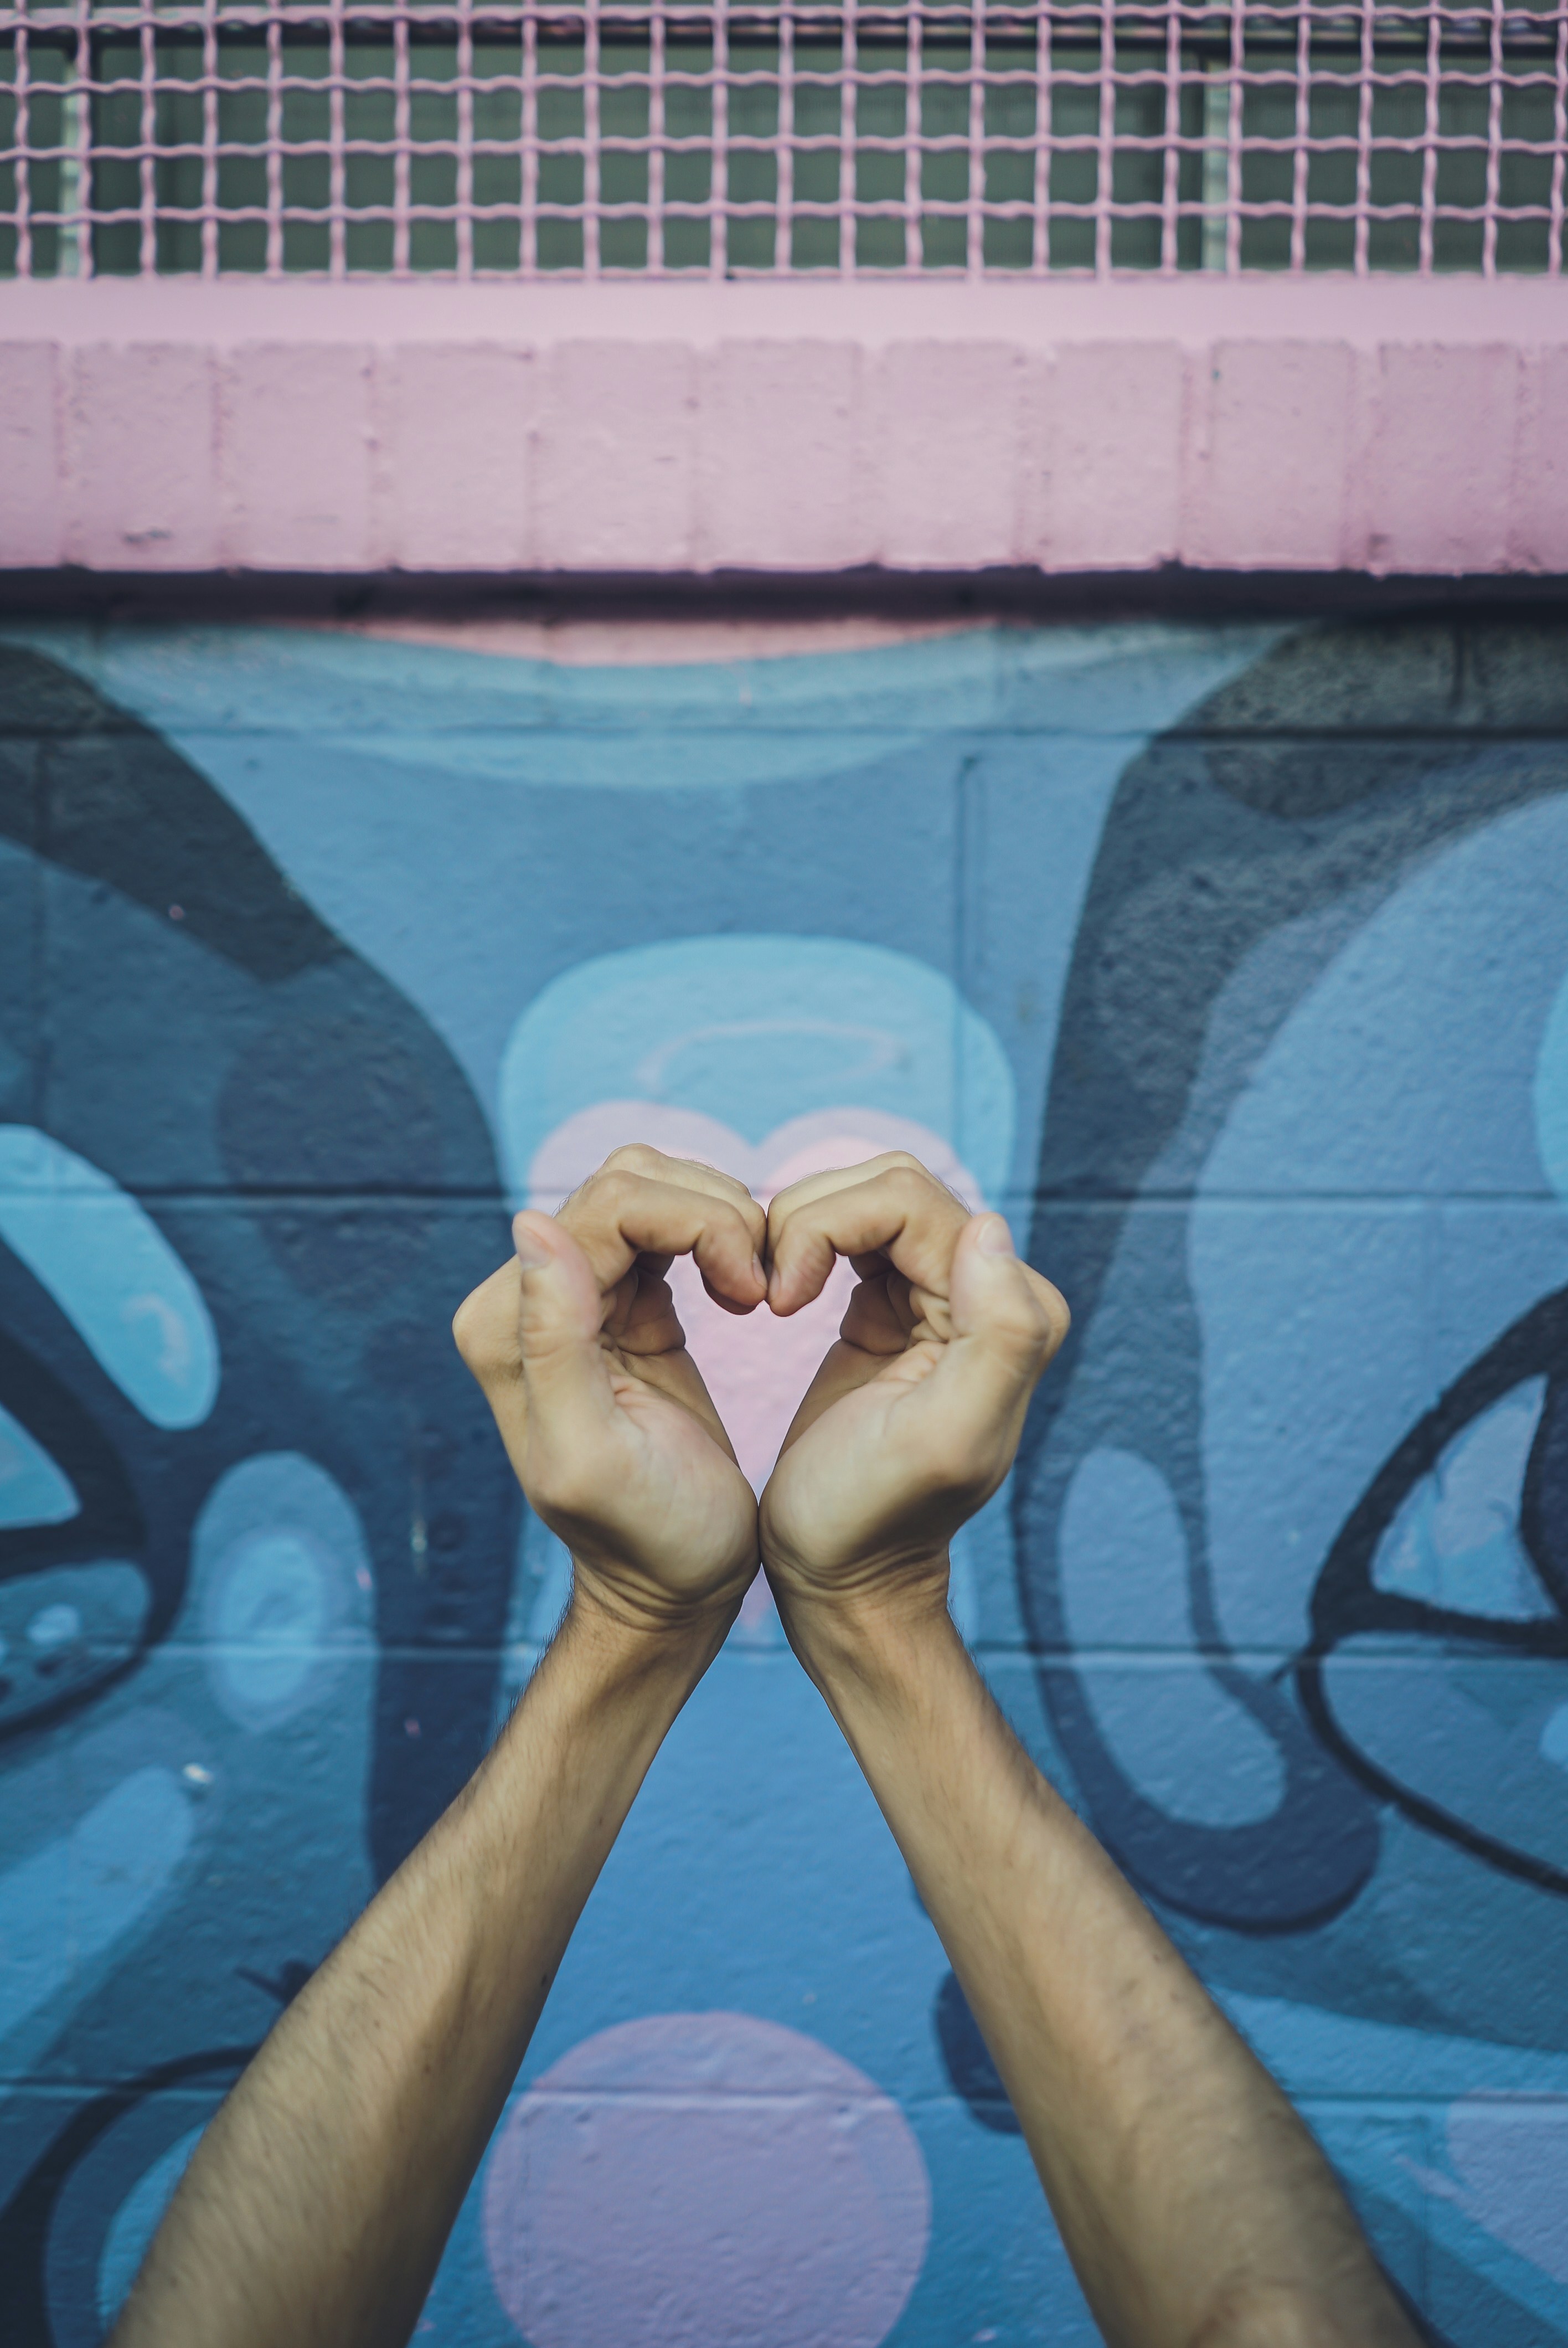 this is another version of creating a heart with two hands and having the cool blue color background at Santa Fe. Santa Fe is the art district of Denver. Make sure you don't forget your camera if you come for a visit.